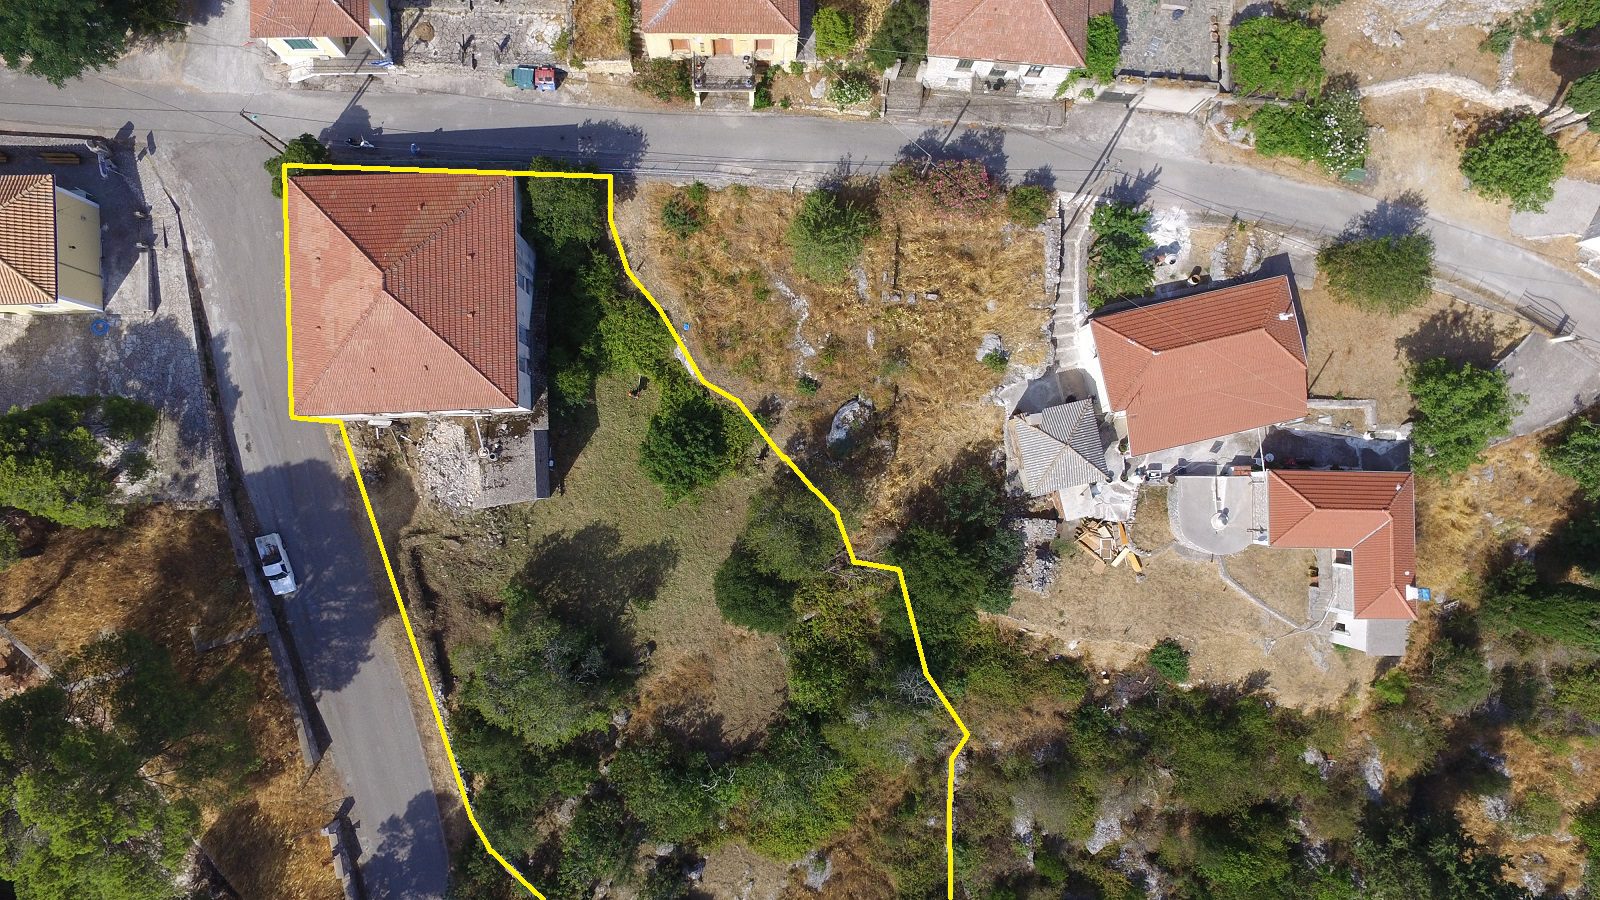 Aerial views of house for sale Ithaca Greece, Anoghi